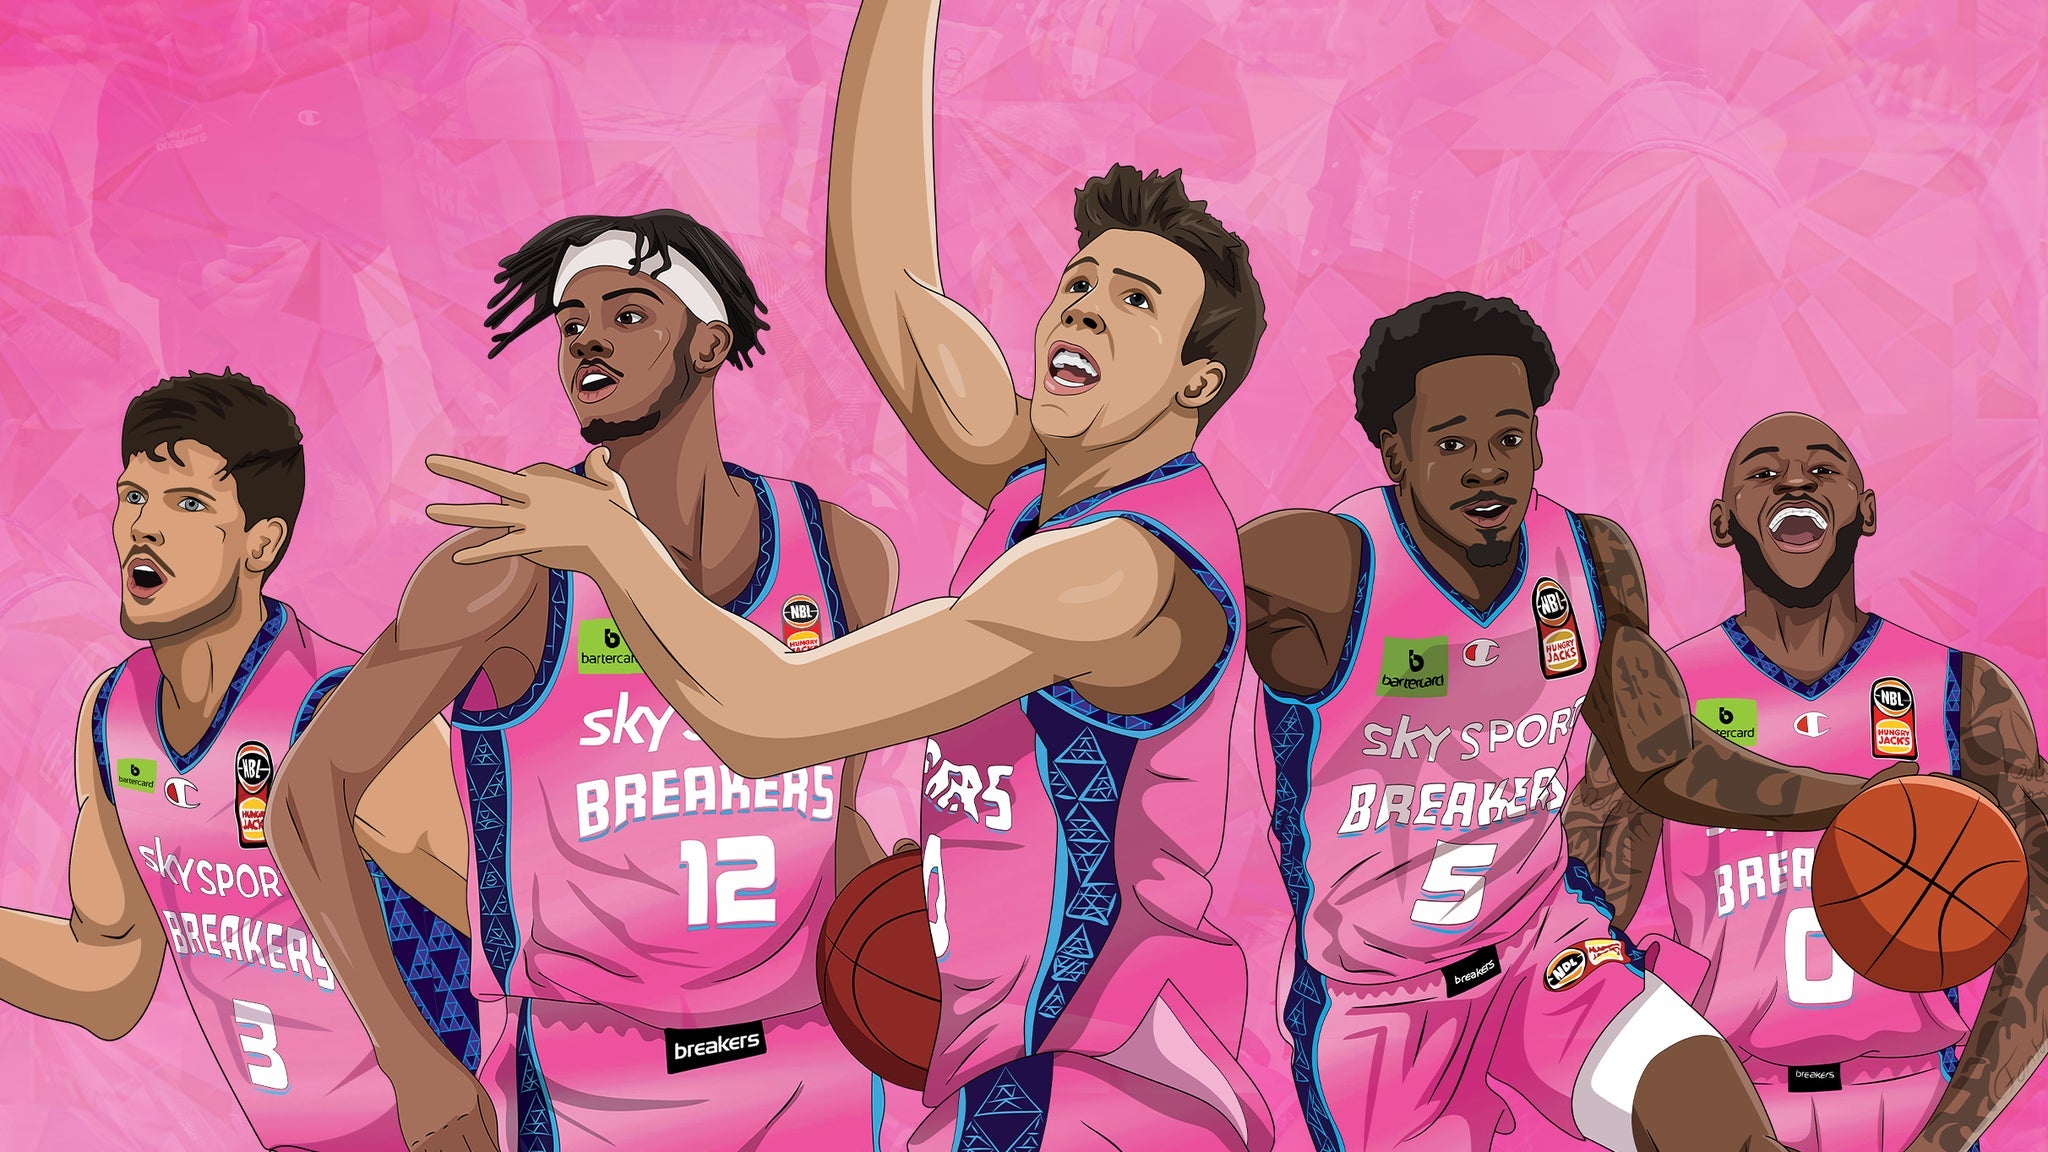 Sky Sport Breakers Playoff - Game 1 in Auckland promo photo for Exclusive presale offer code